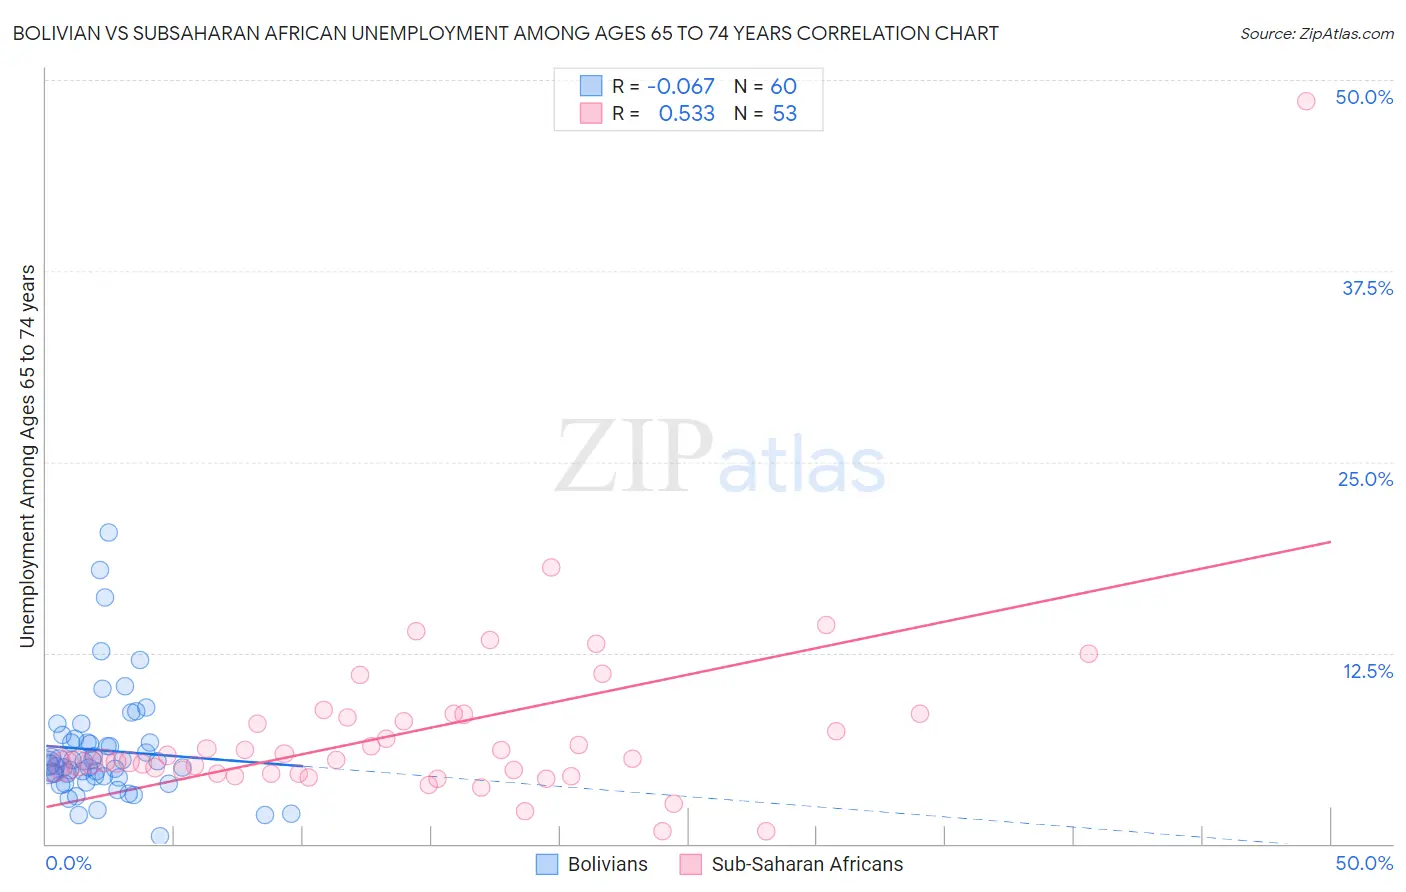 Bolivian vs Subsaharan African Unemployment Among Ages 65 to 74 years